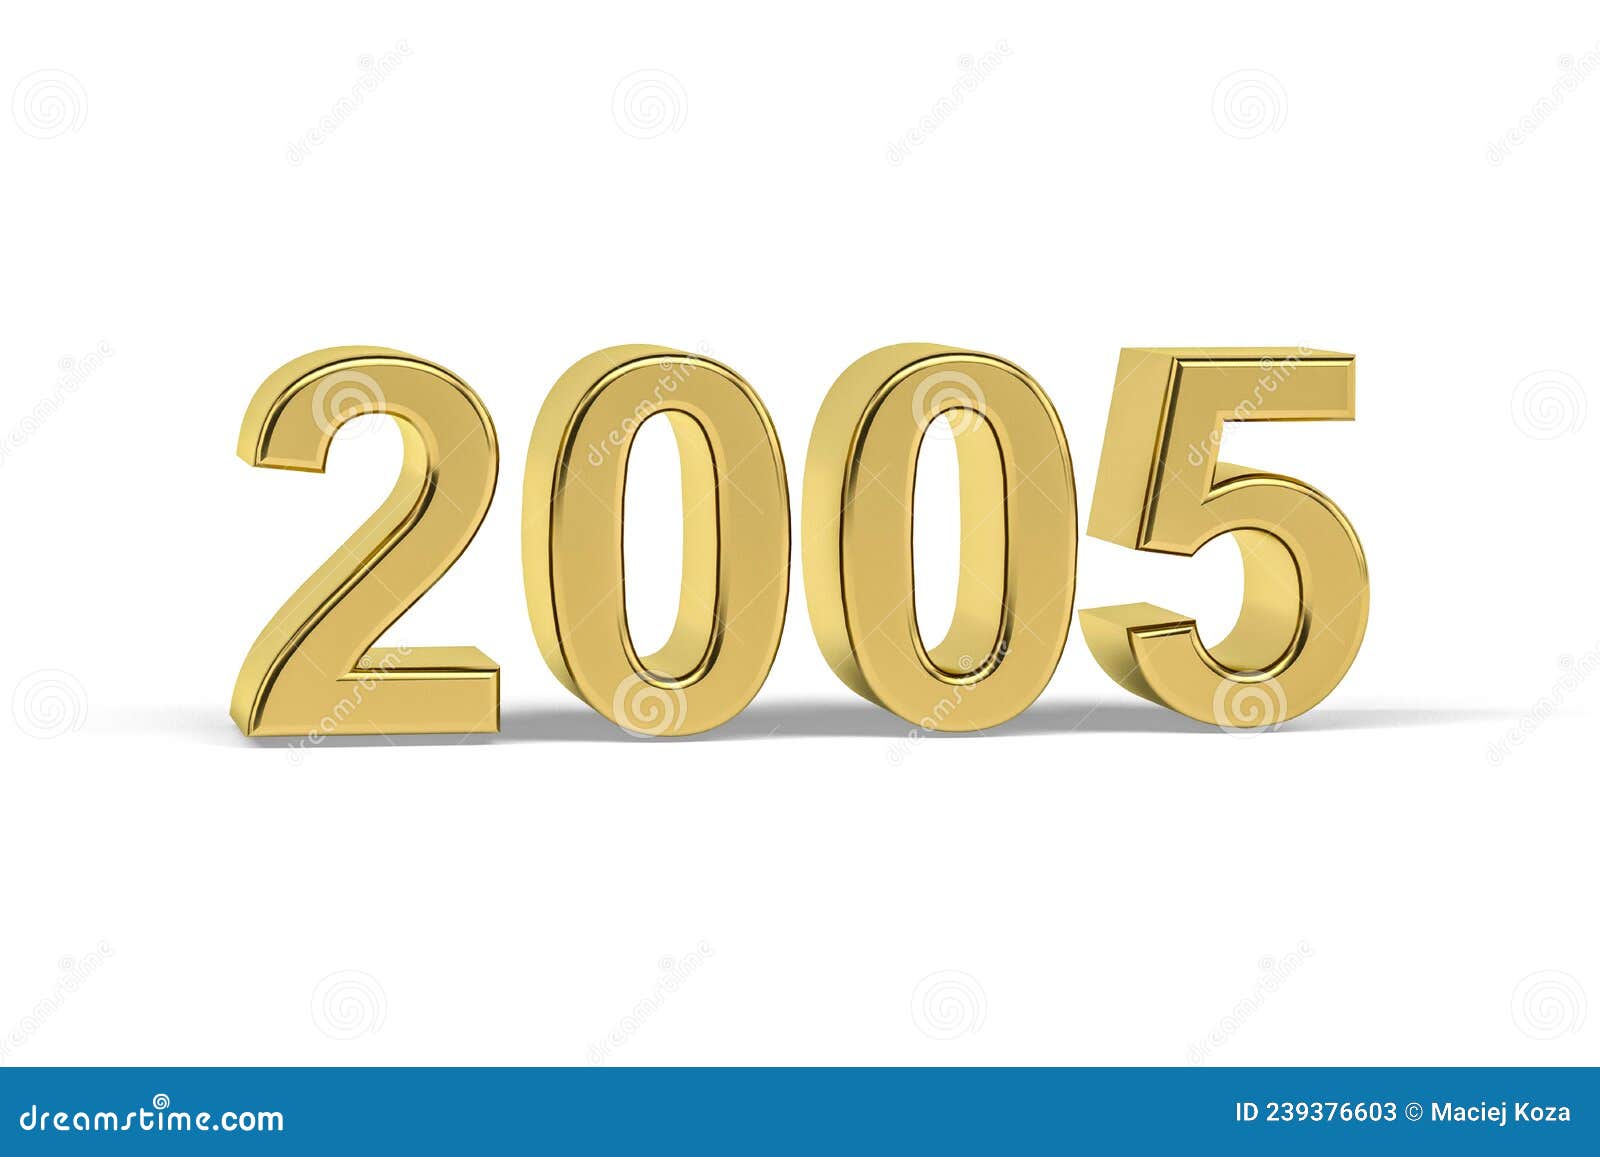 Golden 3d Number 2005 Year 2005 Isolated On White Background Stock